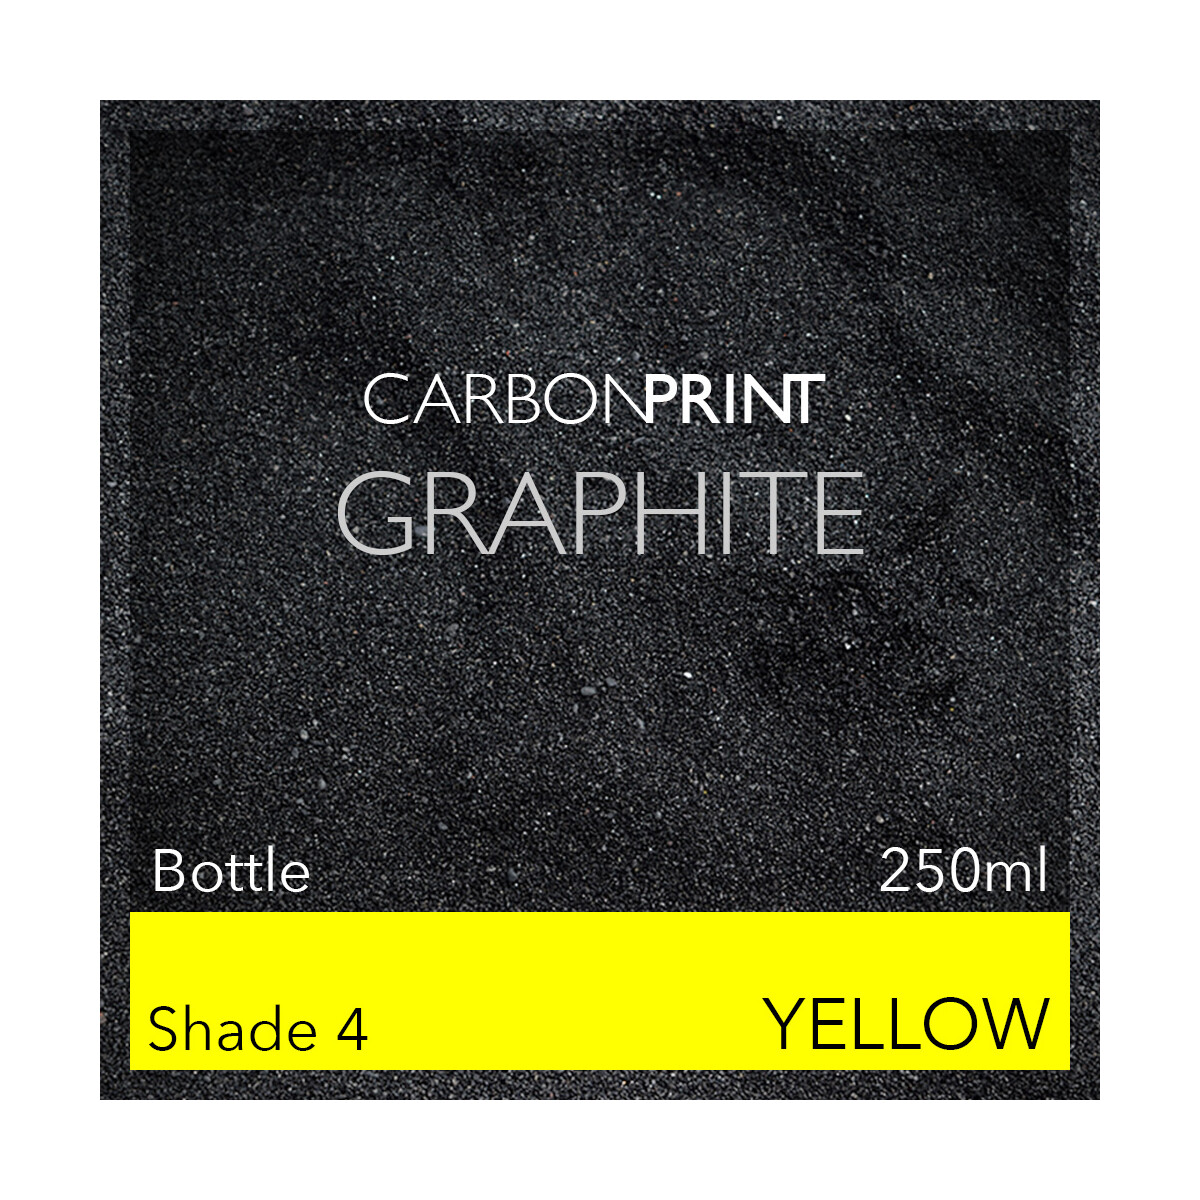 Carbonprint Graphite Shade4 Channel Y 250ml